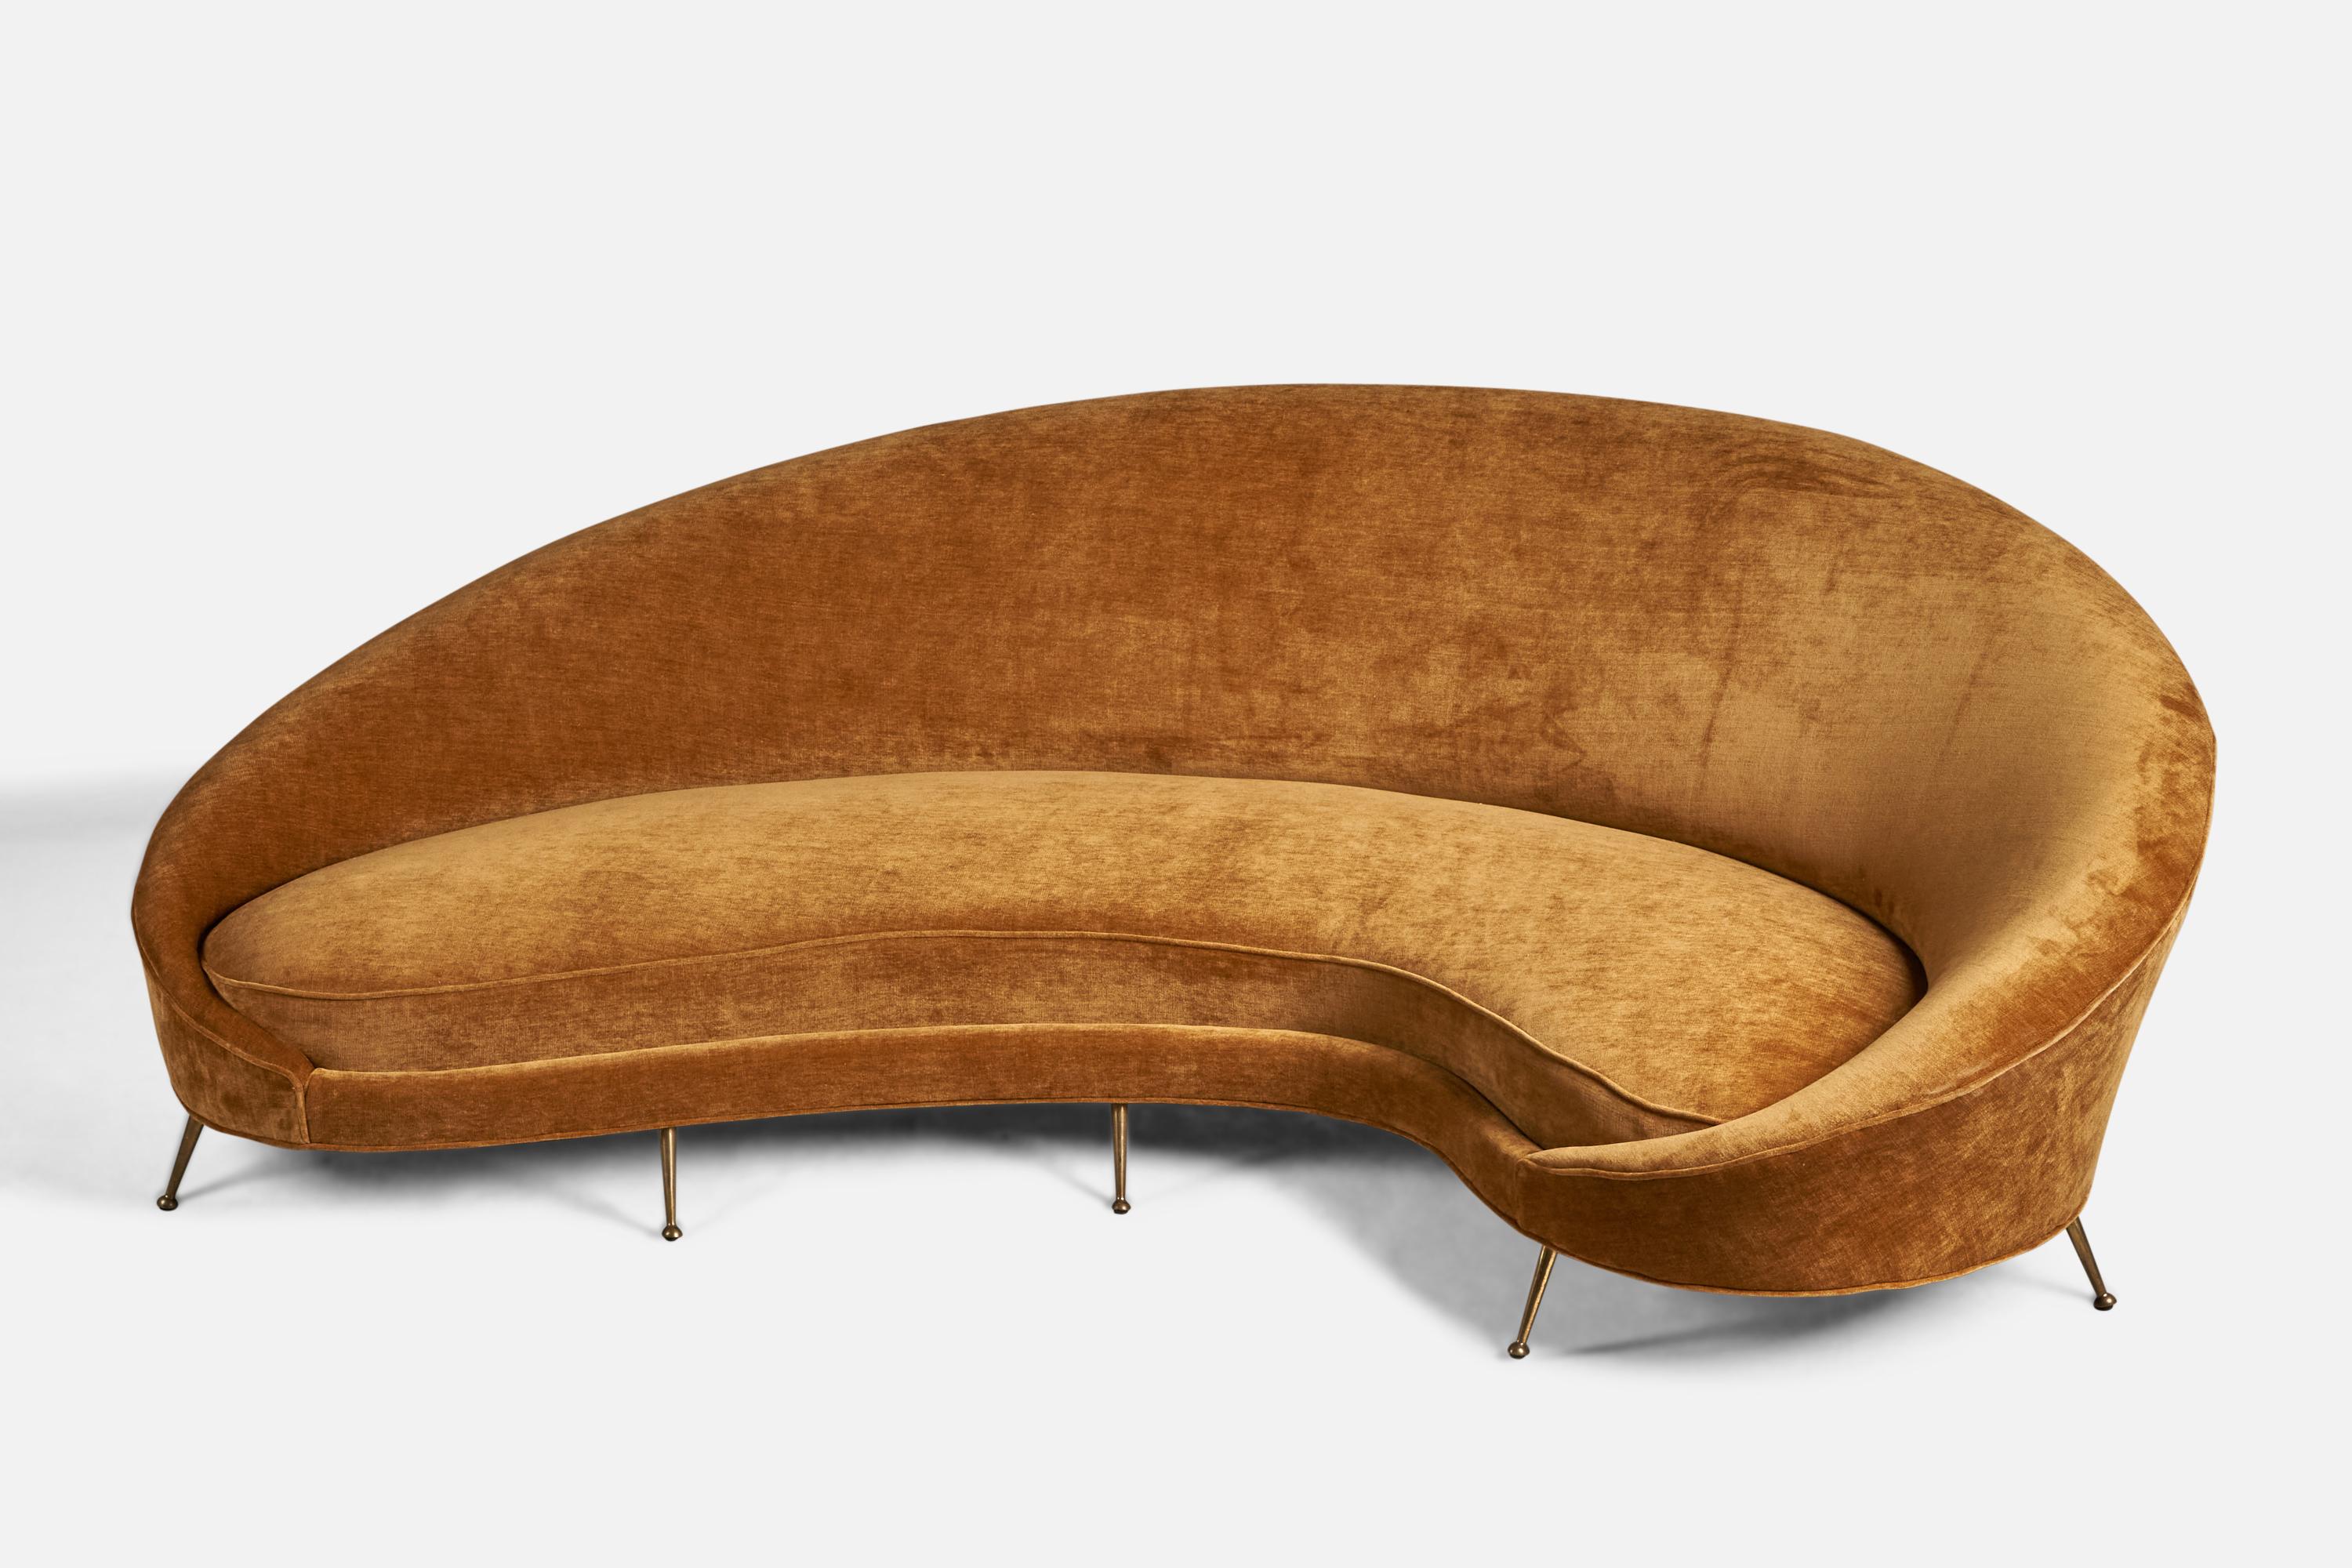 A curved brass and orange velvet fabric sofa designed by Federico Munari and produced by ISA Bergamo, Italy, 1950s.

14” seat height
